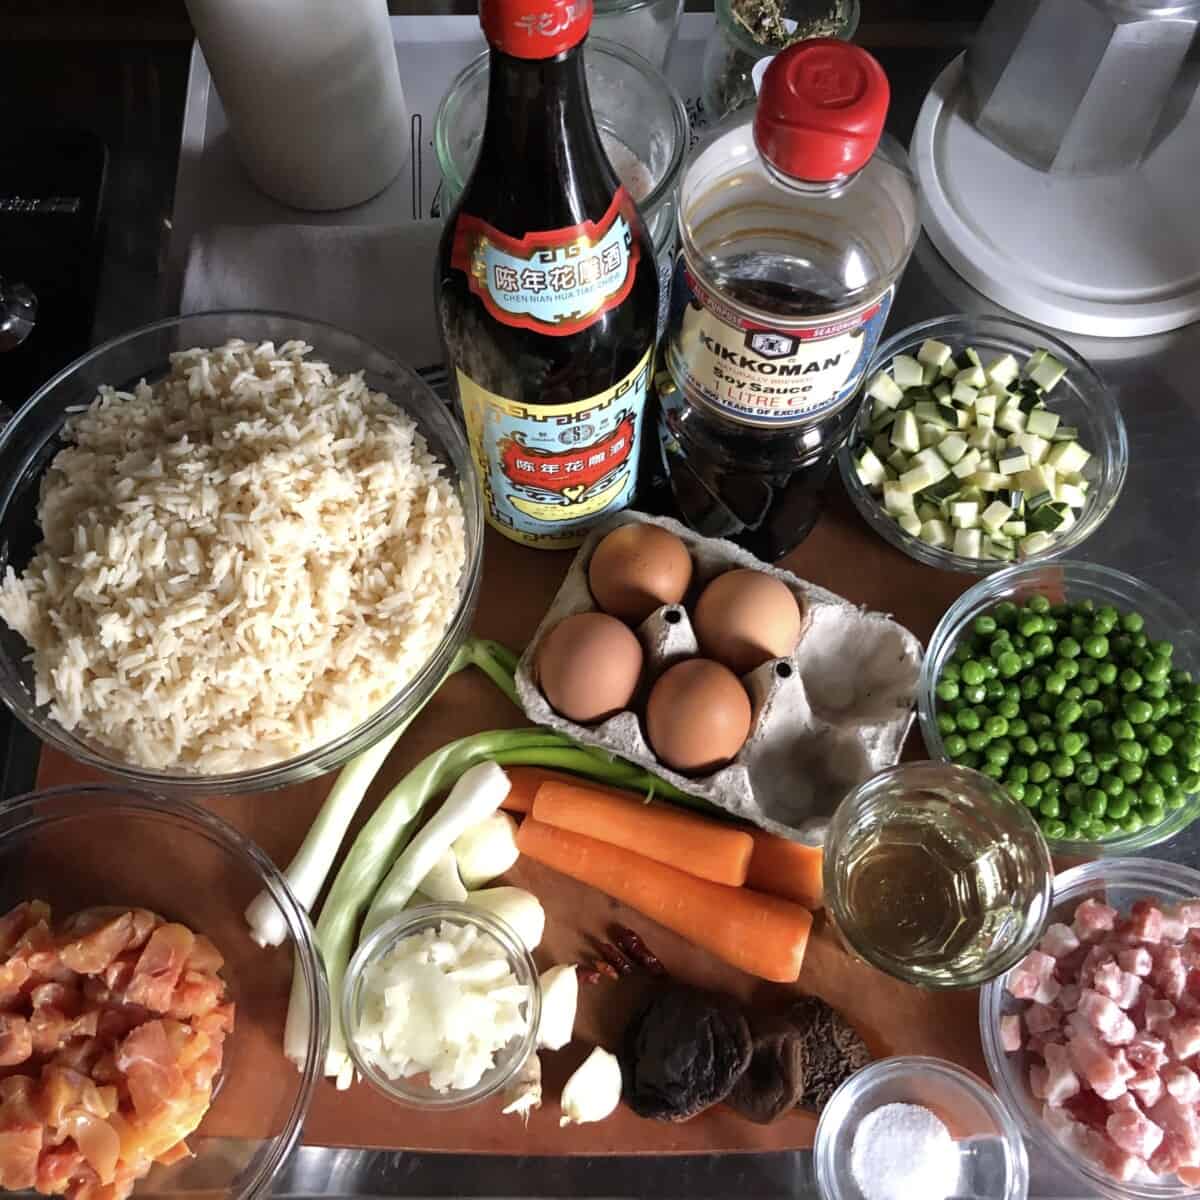 House Special fried rice ingredients on a cutting board (except the shrimp)